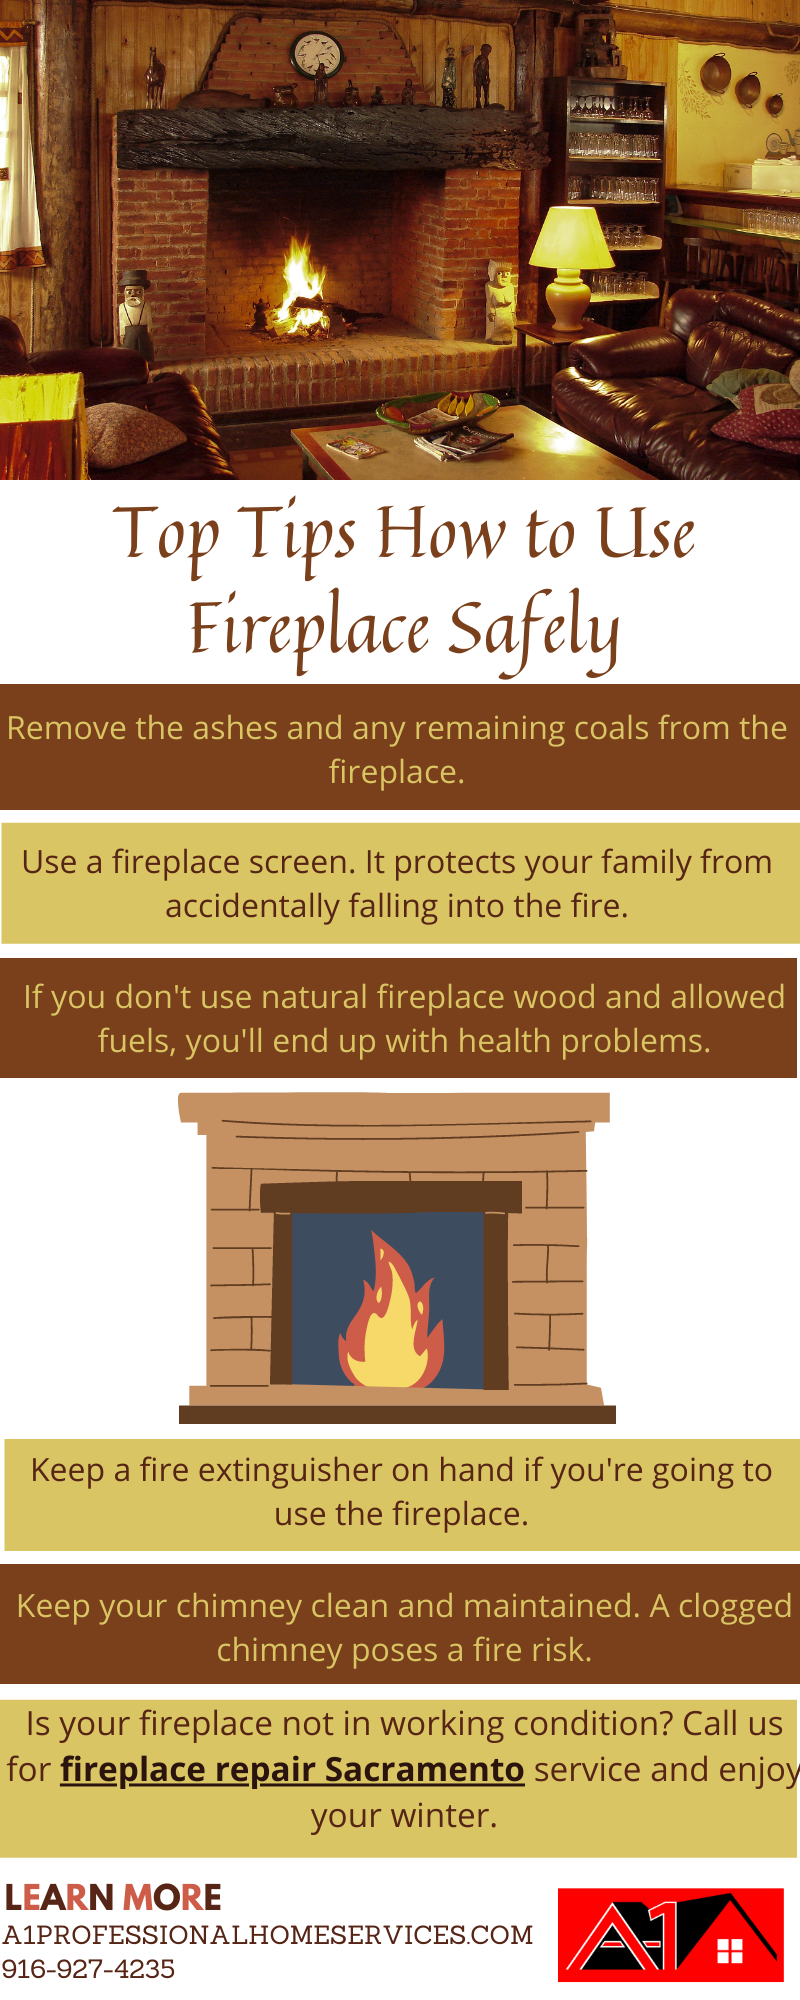 Top Tips to Use Fireplace Safely